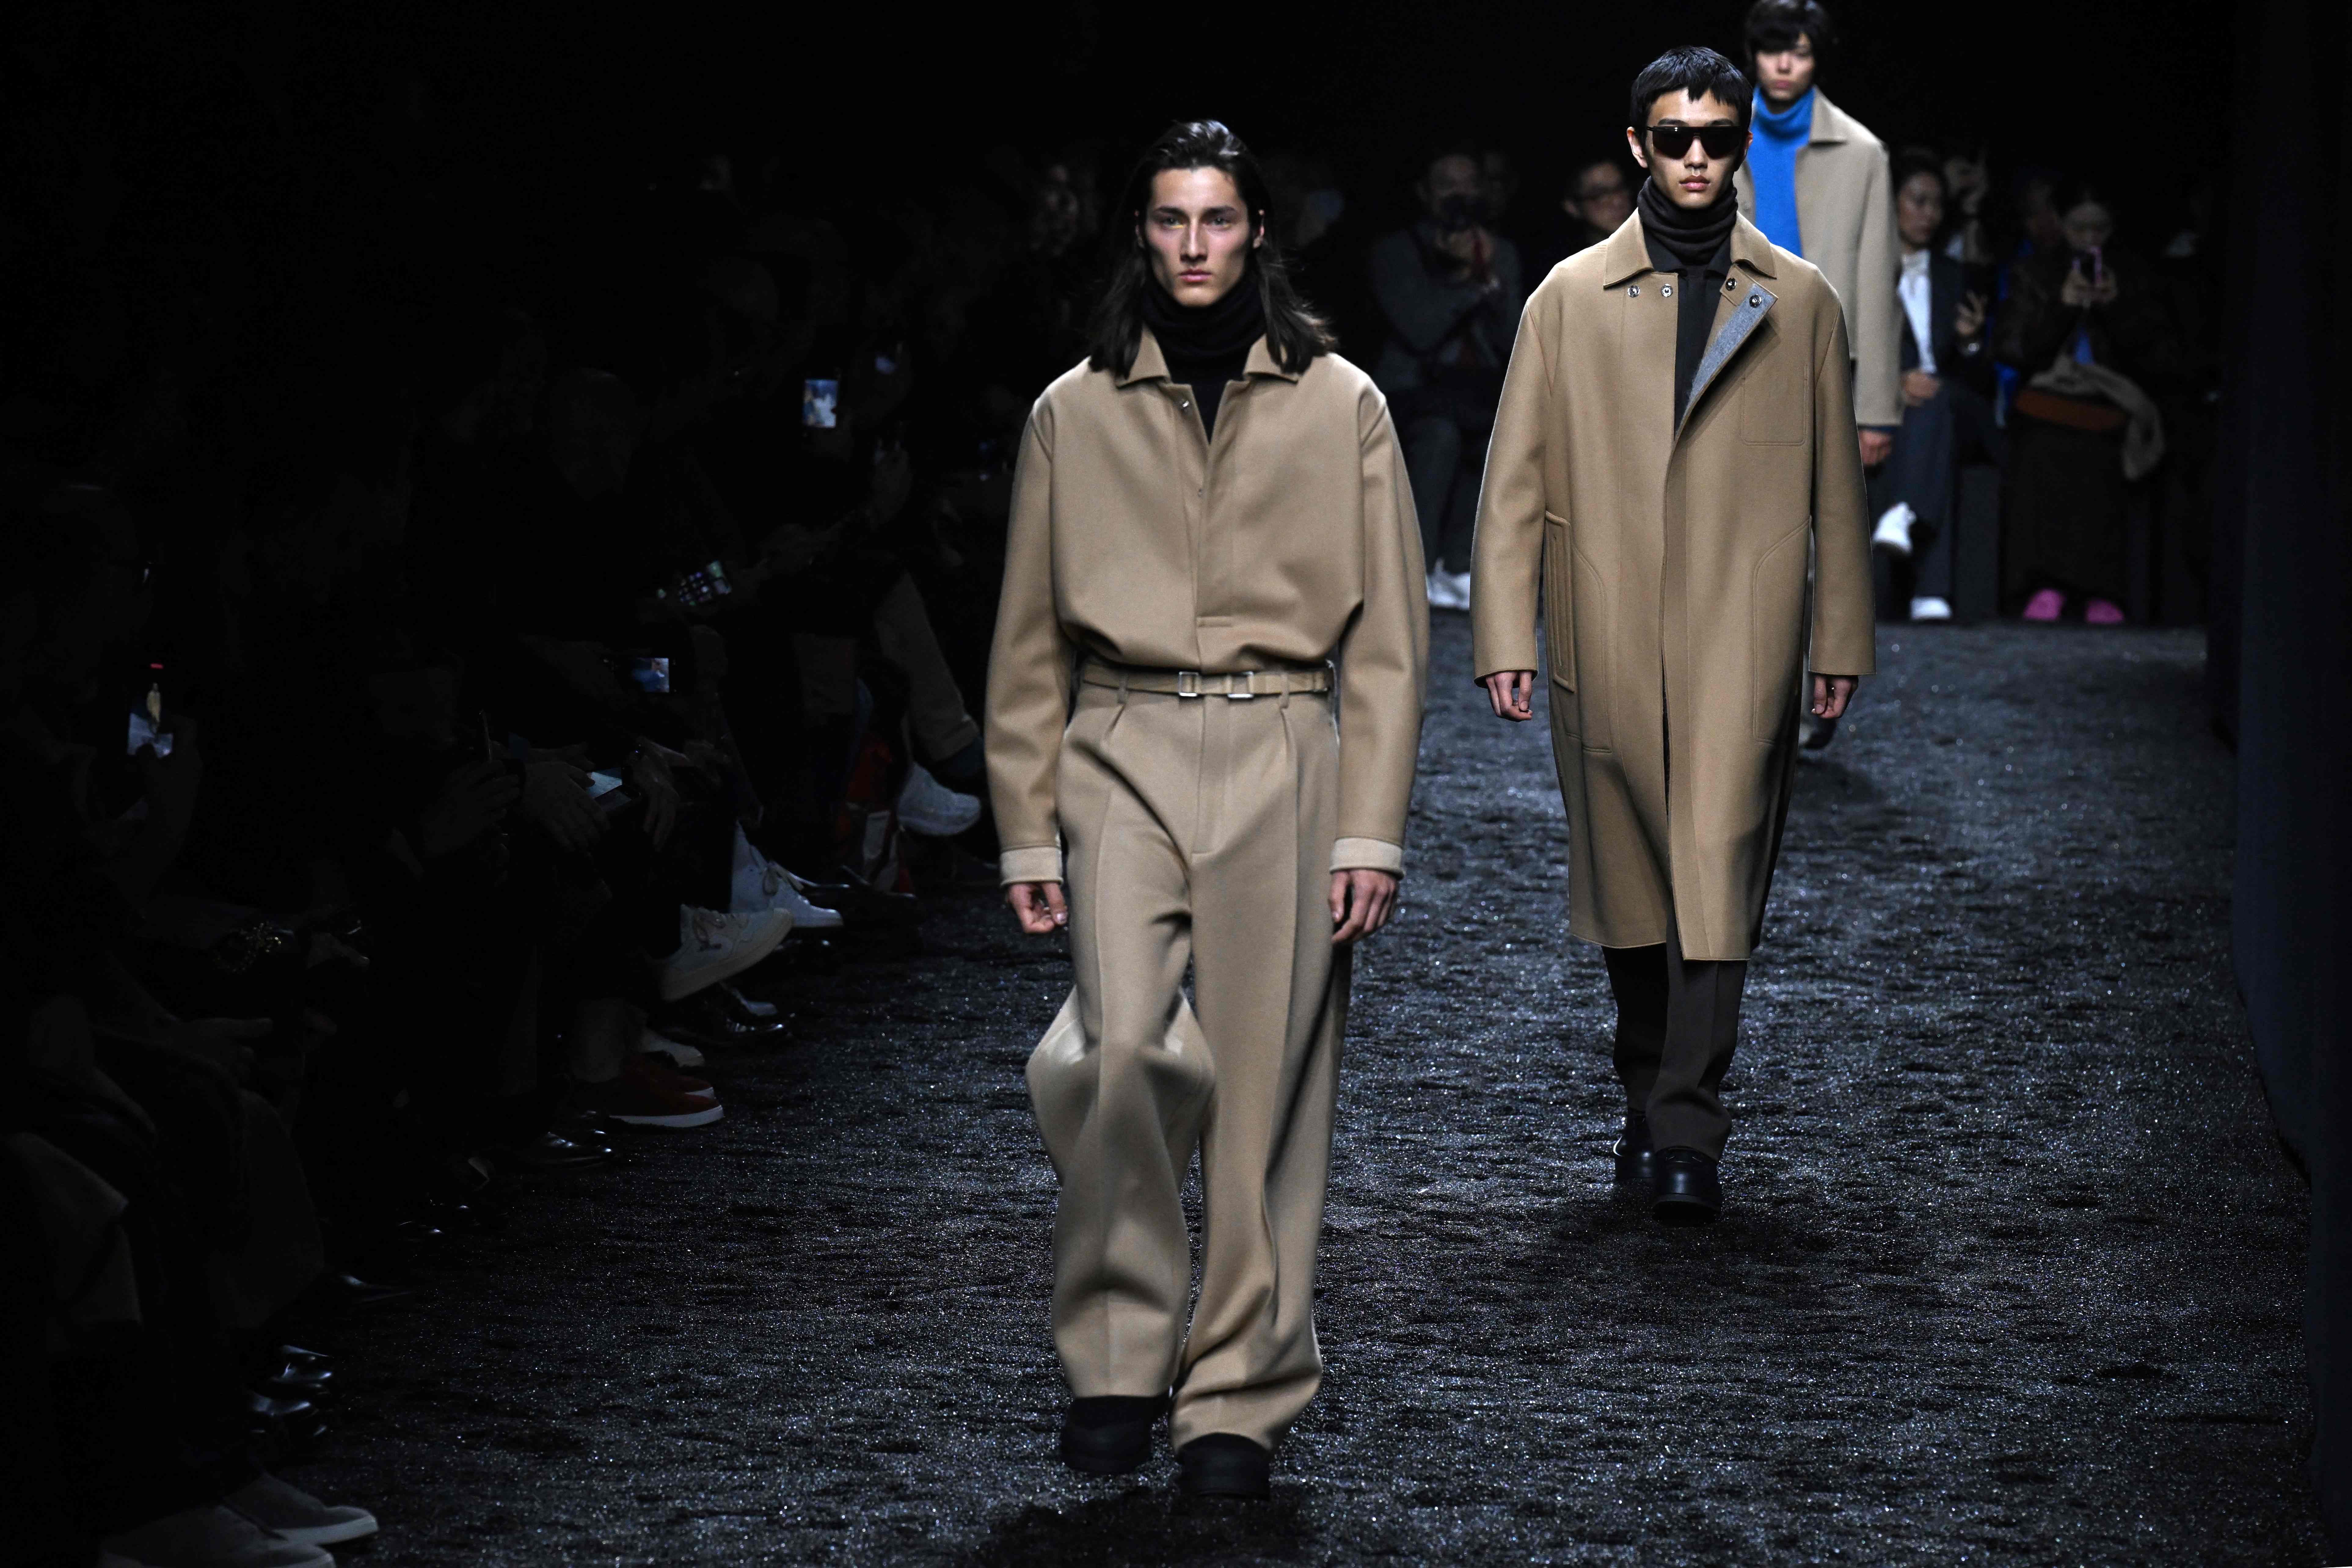 Men's Fashion Weeks in Europe Have Been Canceled